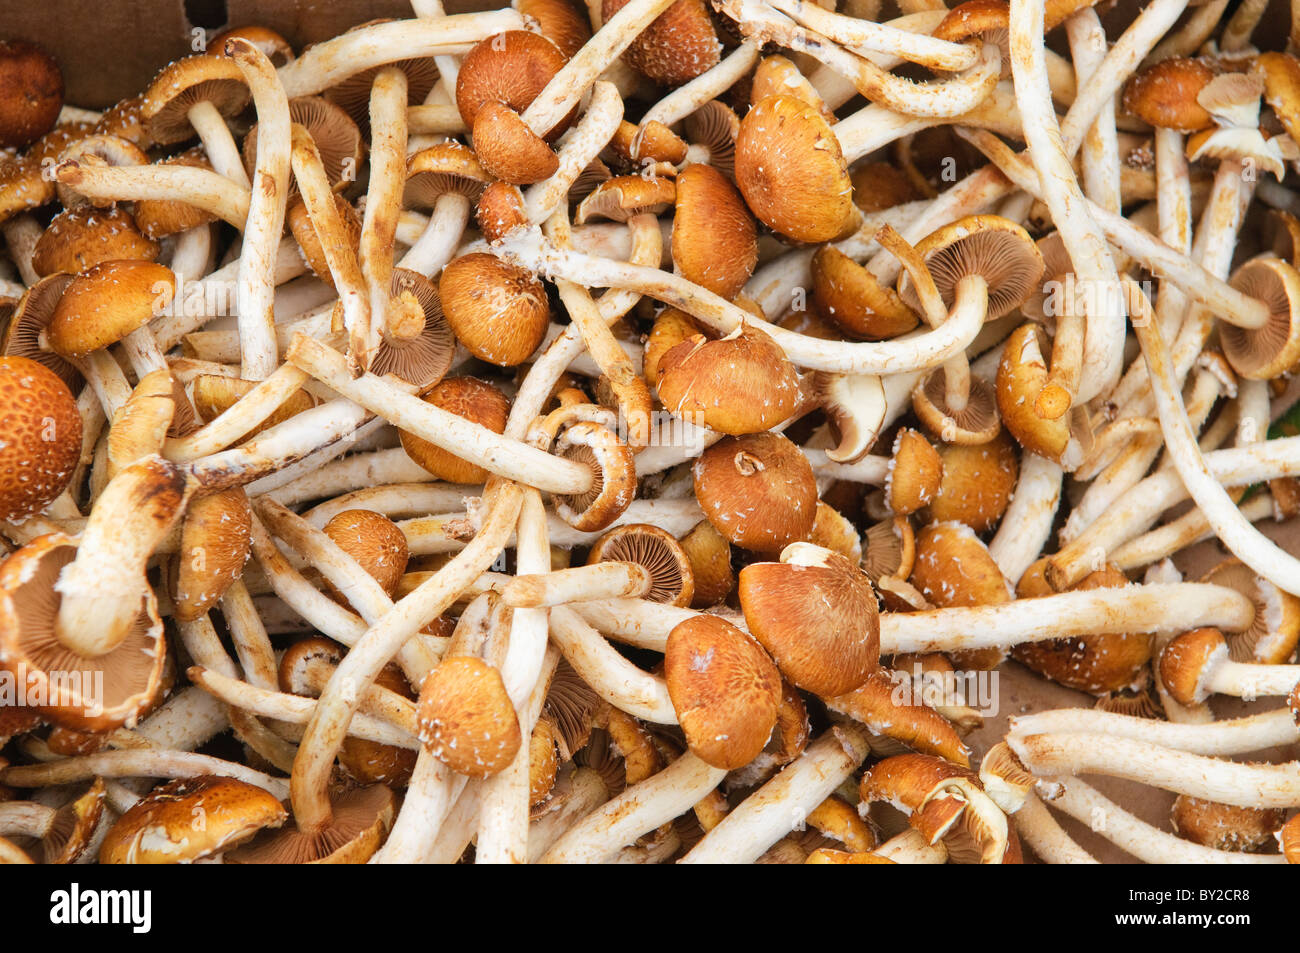 Wild mushrooms for sale on a Farmers Market stall Stock Photo